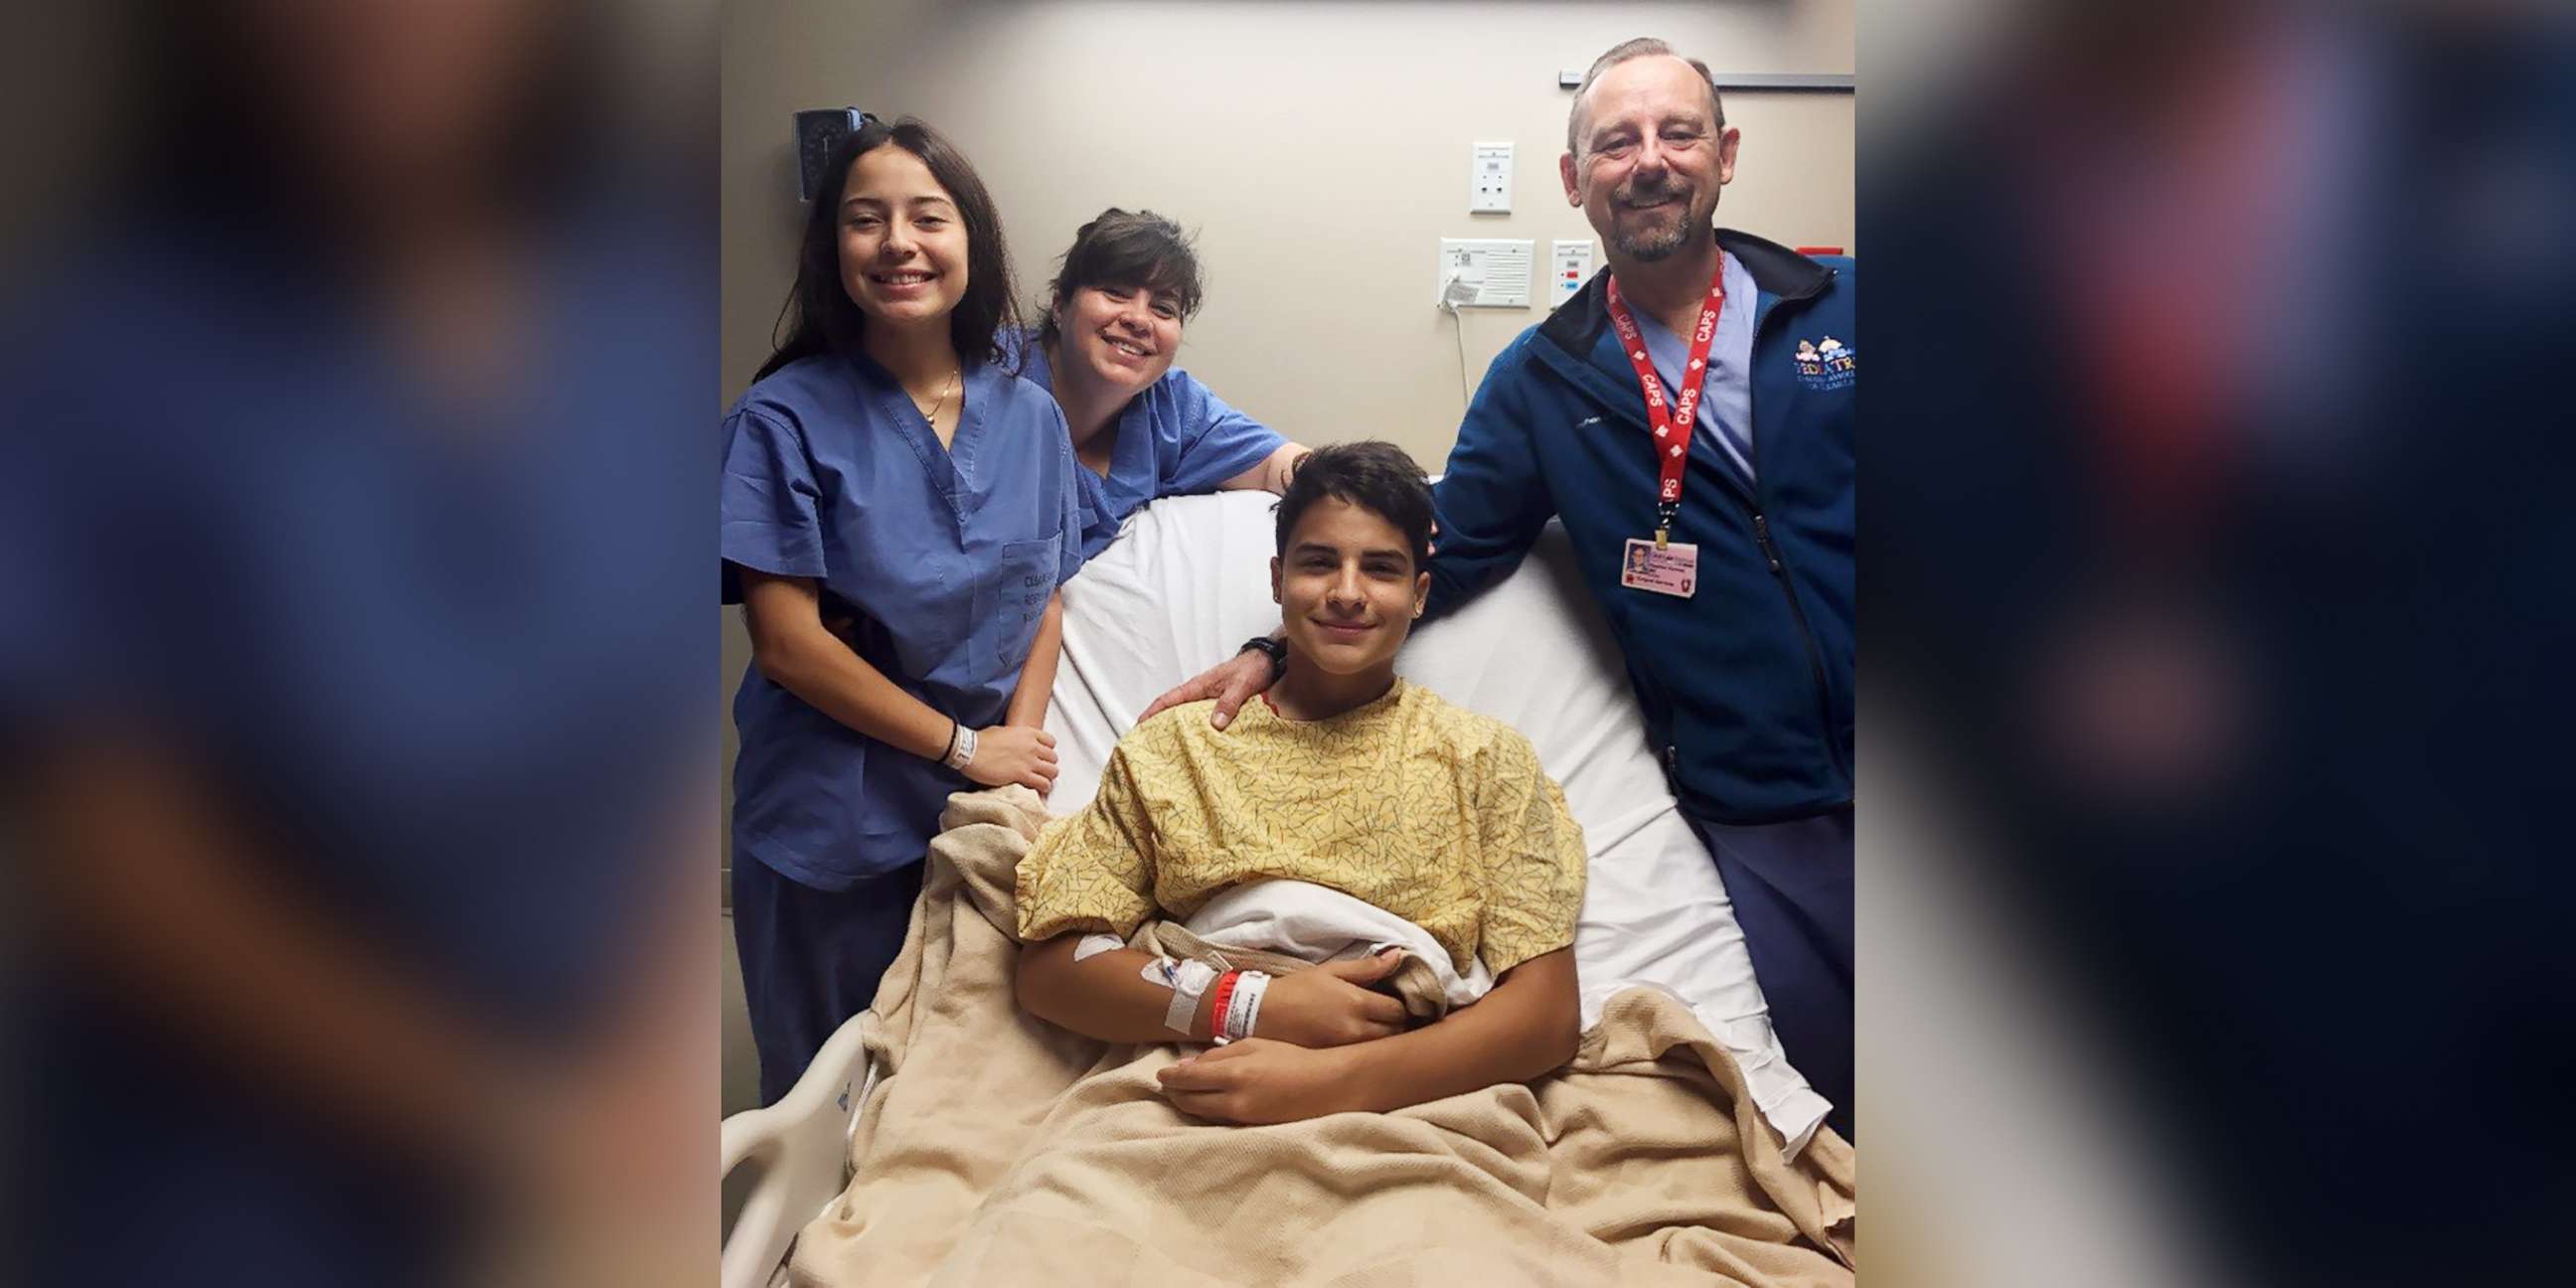 PHOTO: Dr. Stephen Kimmel canoed through flood water to perform surgery on Jacob Terrazas in Webster, Texas, early Saturday morning after Hurricane Harvey made landfall.